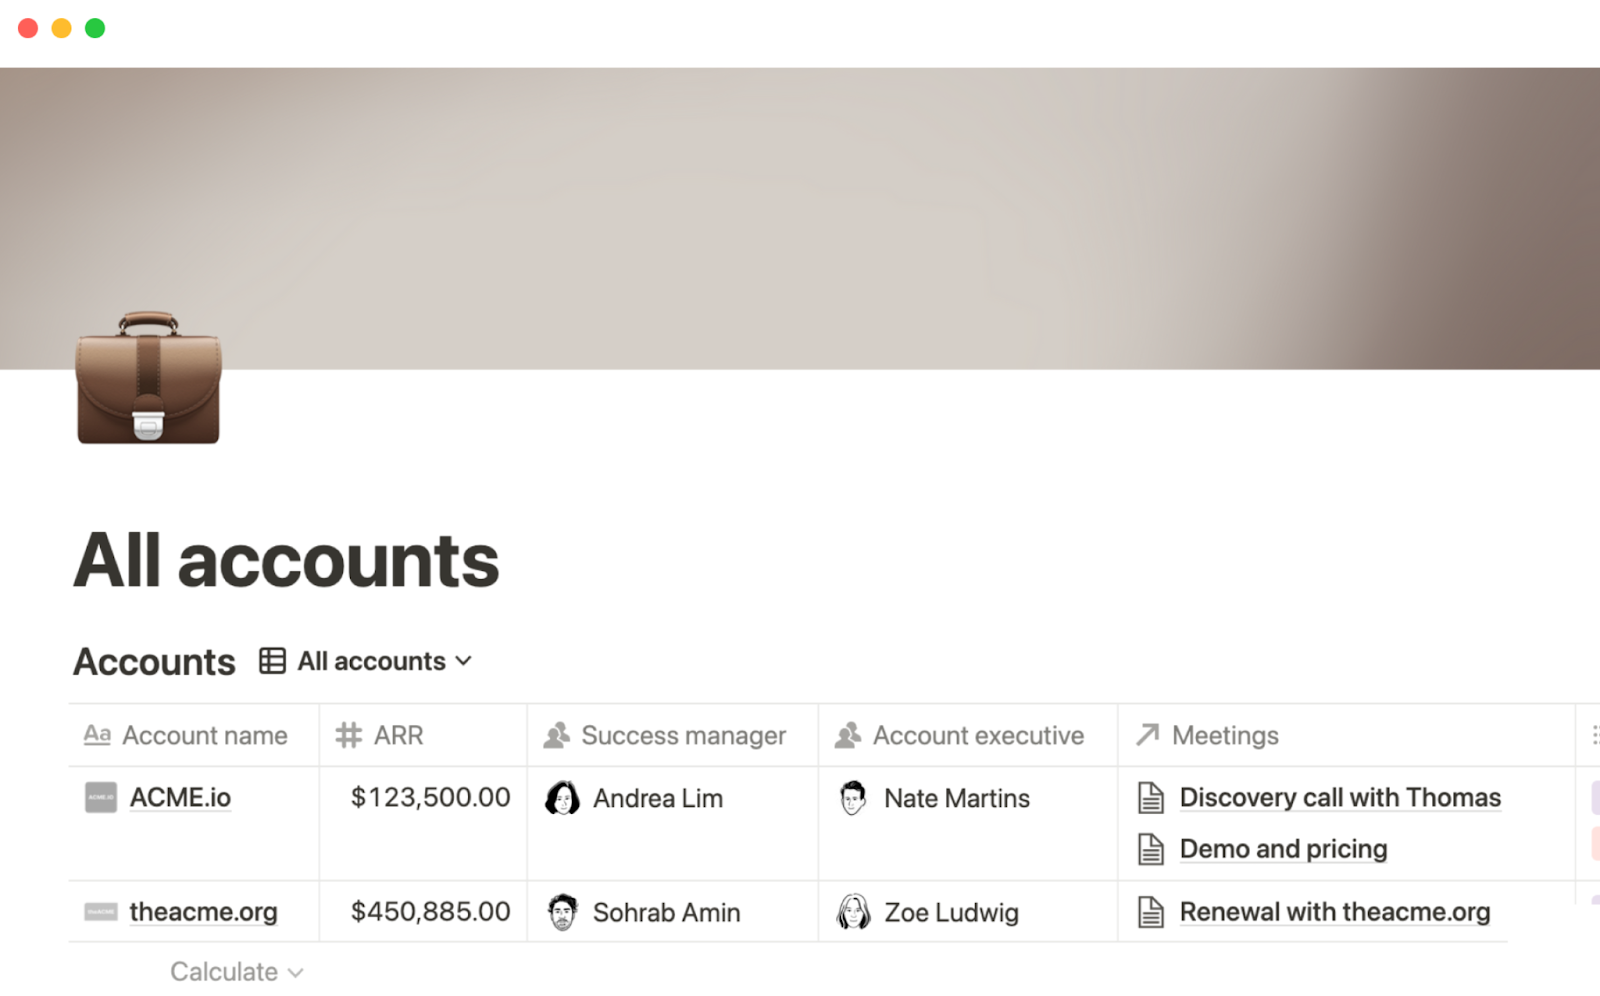 Screenshot of All accounts template from Notion.